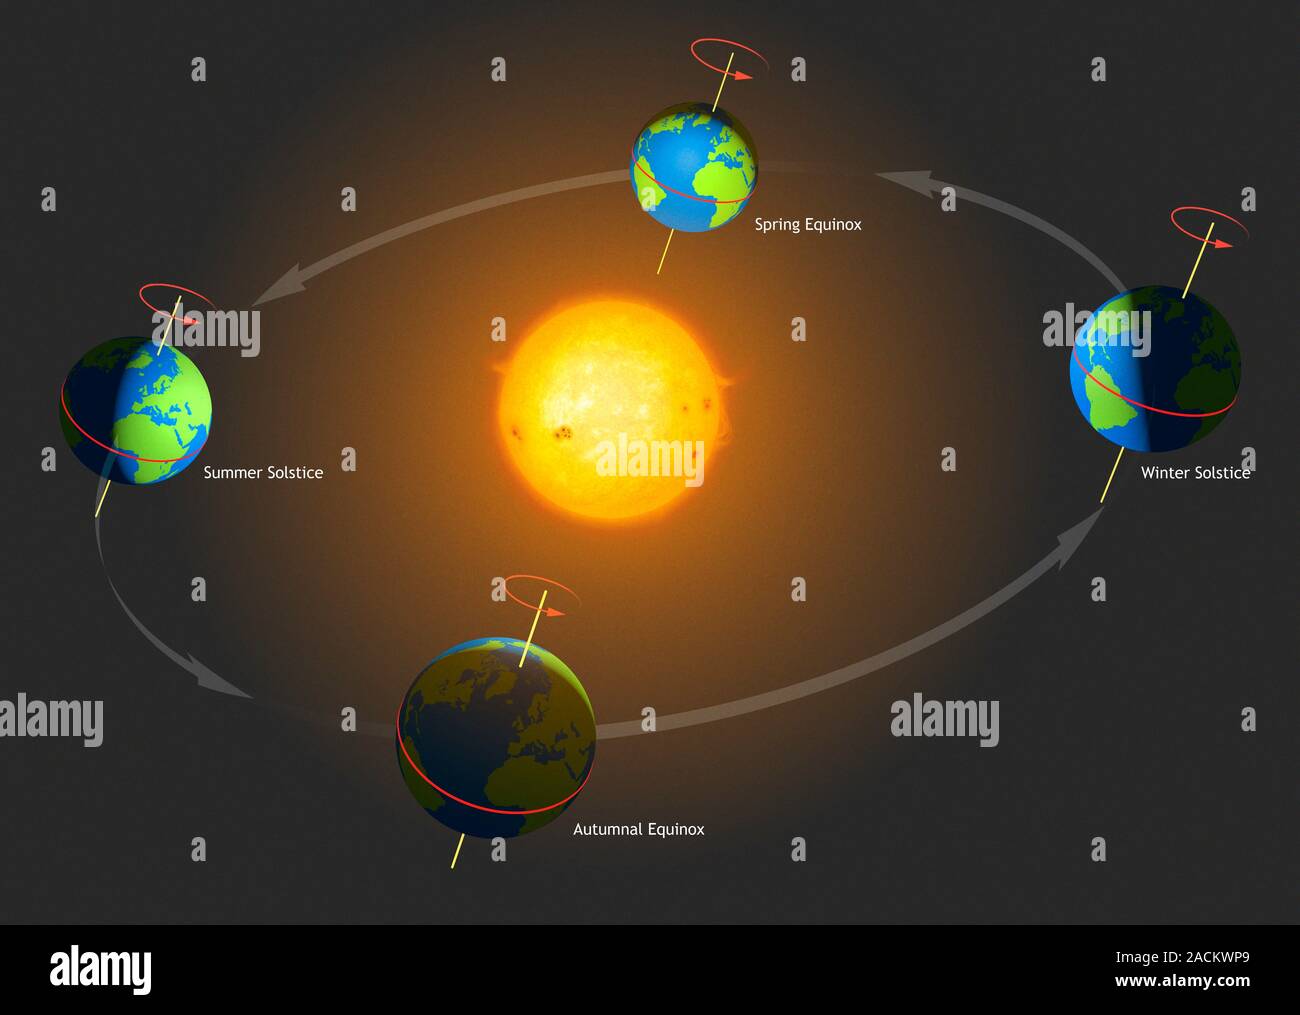 Schematic showing how the position of the Earth around the Sun gives rise to the Seasons. The Earth's spin axis is tilted by an angle of 23.5 degrees. Stock Photo